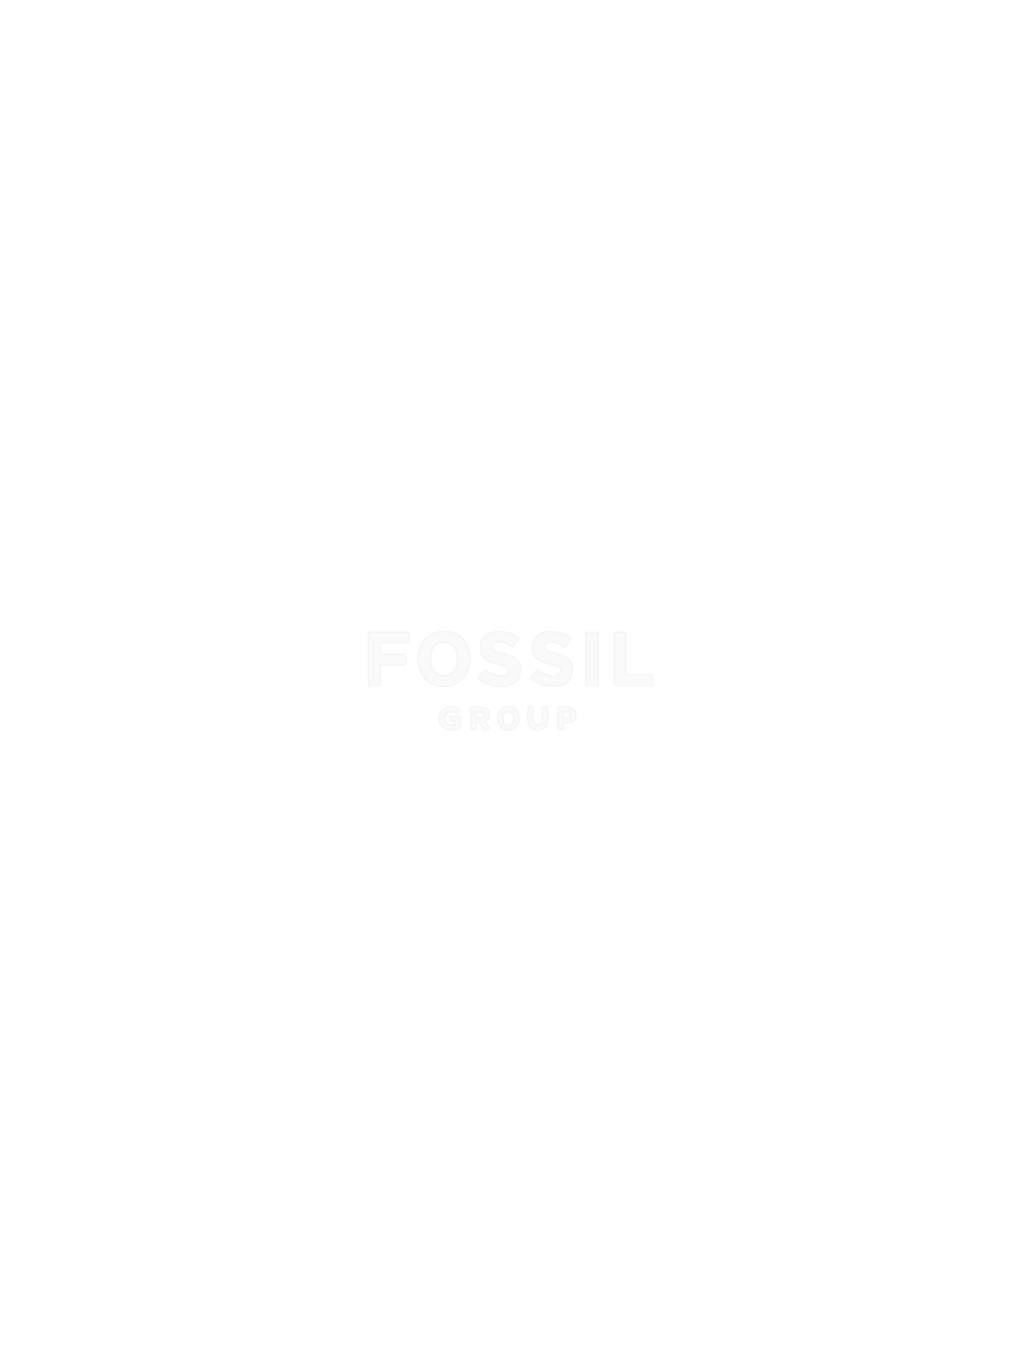 Fossil Group, Inc. 2016 Annual Report